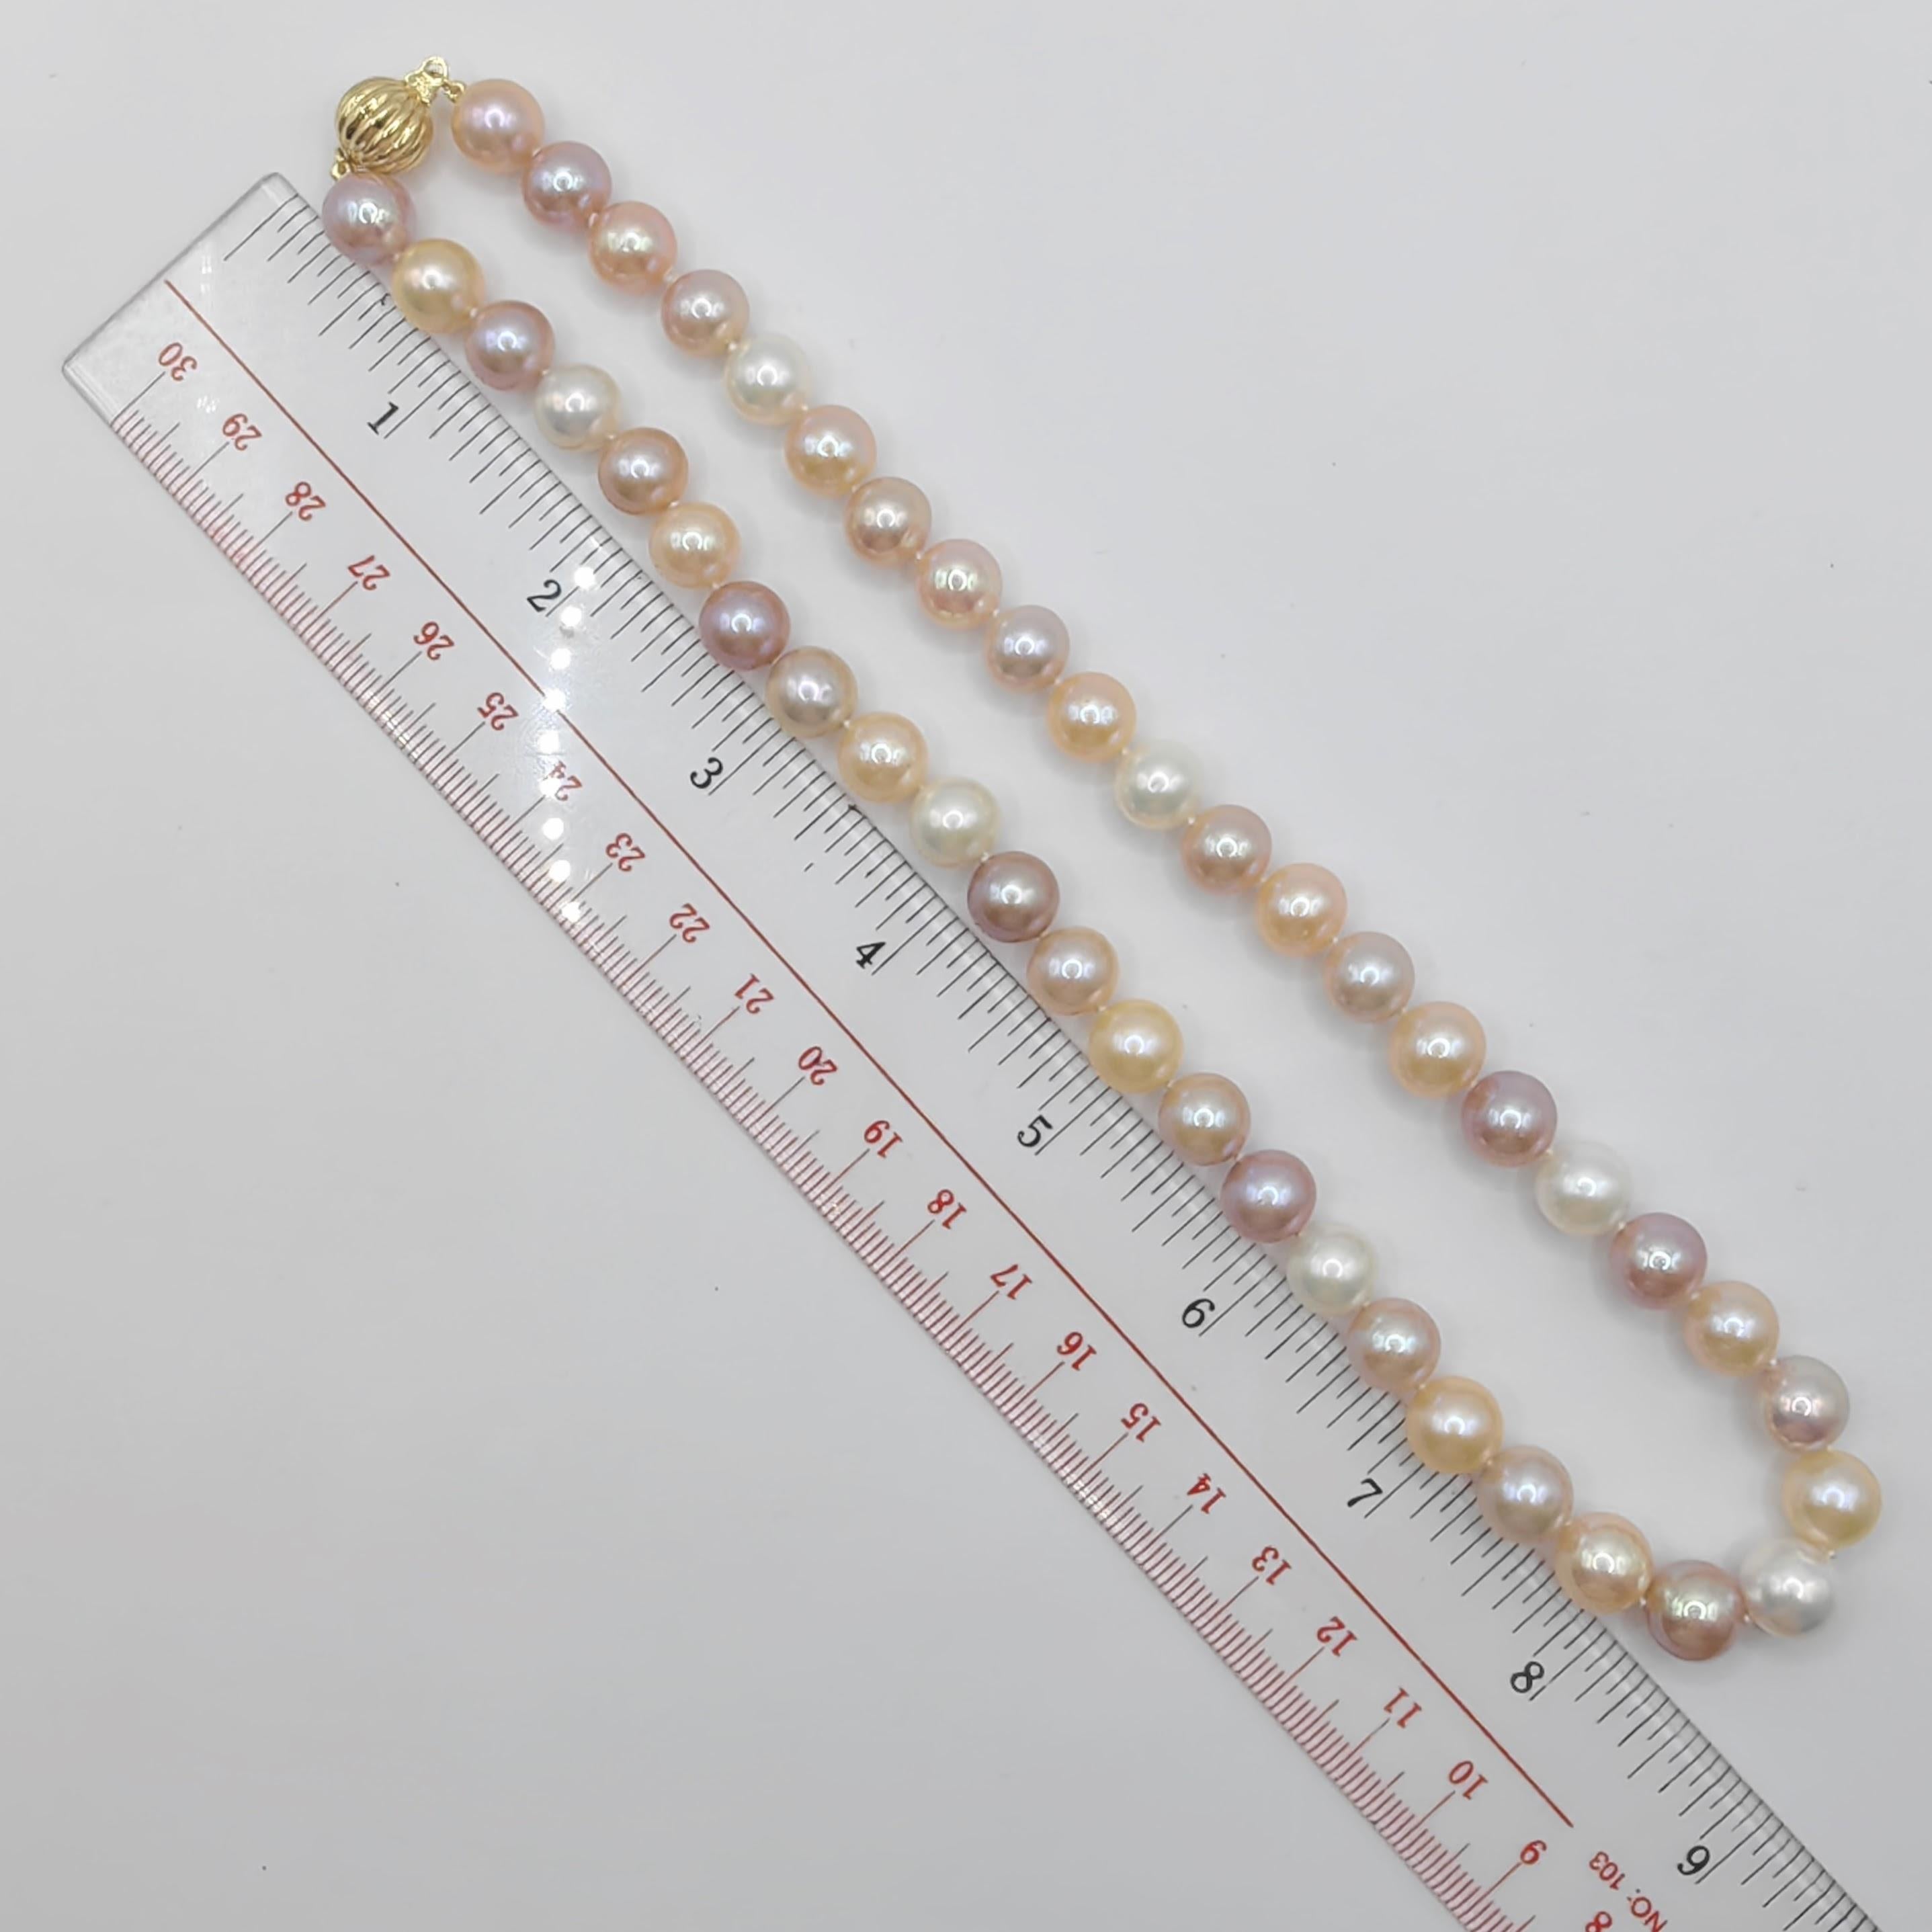 9-10mm Candy Pastel Multi-Color Round Pearl Necklace with 18K Gold Clasp For Sale 4